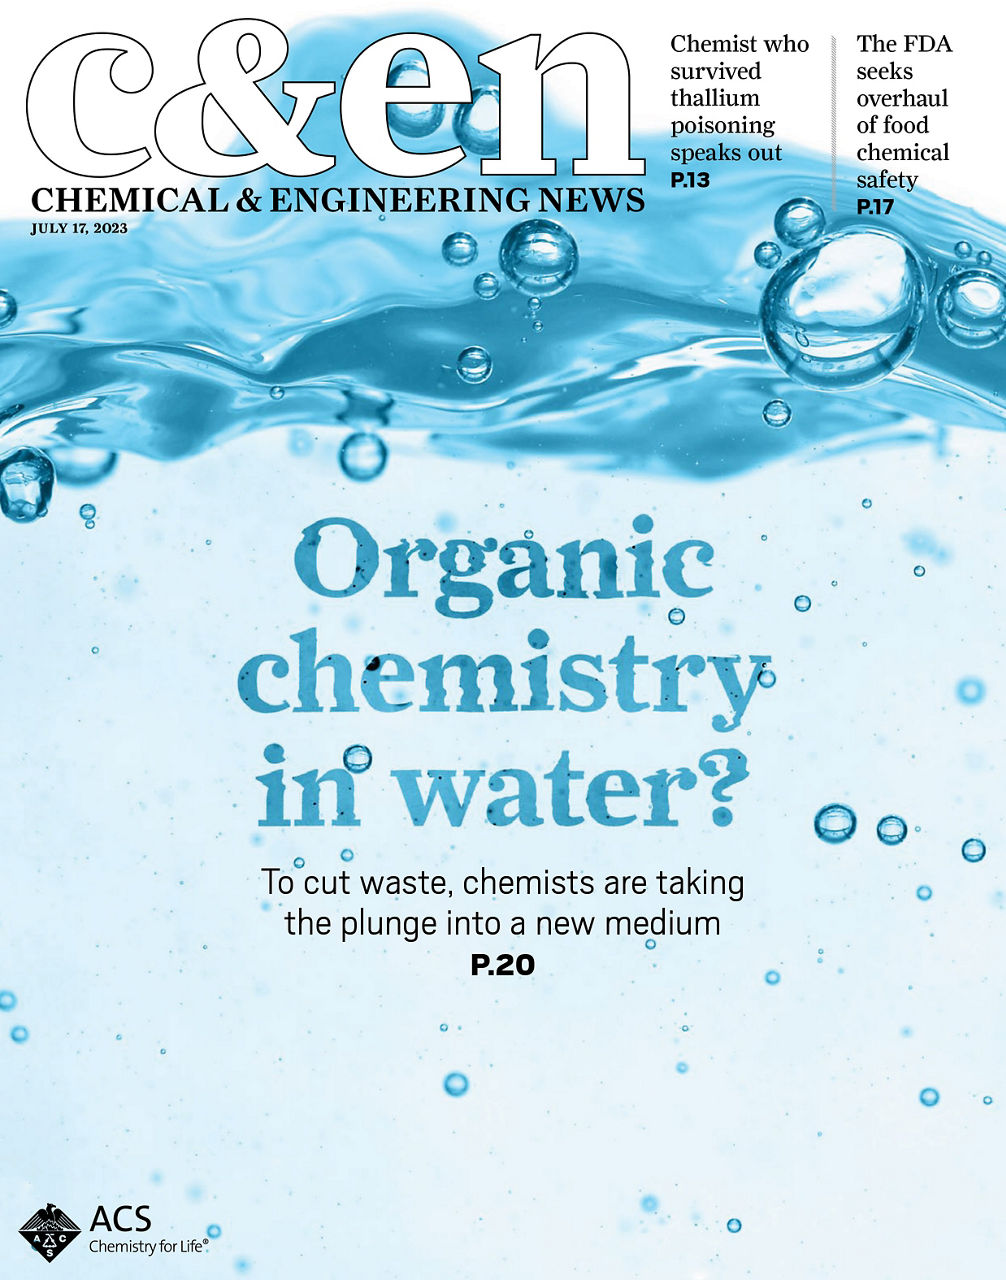 Can organic chemists cut waste by switching to water?